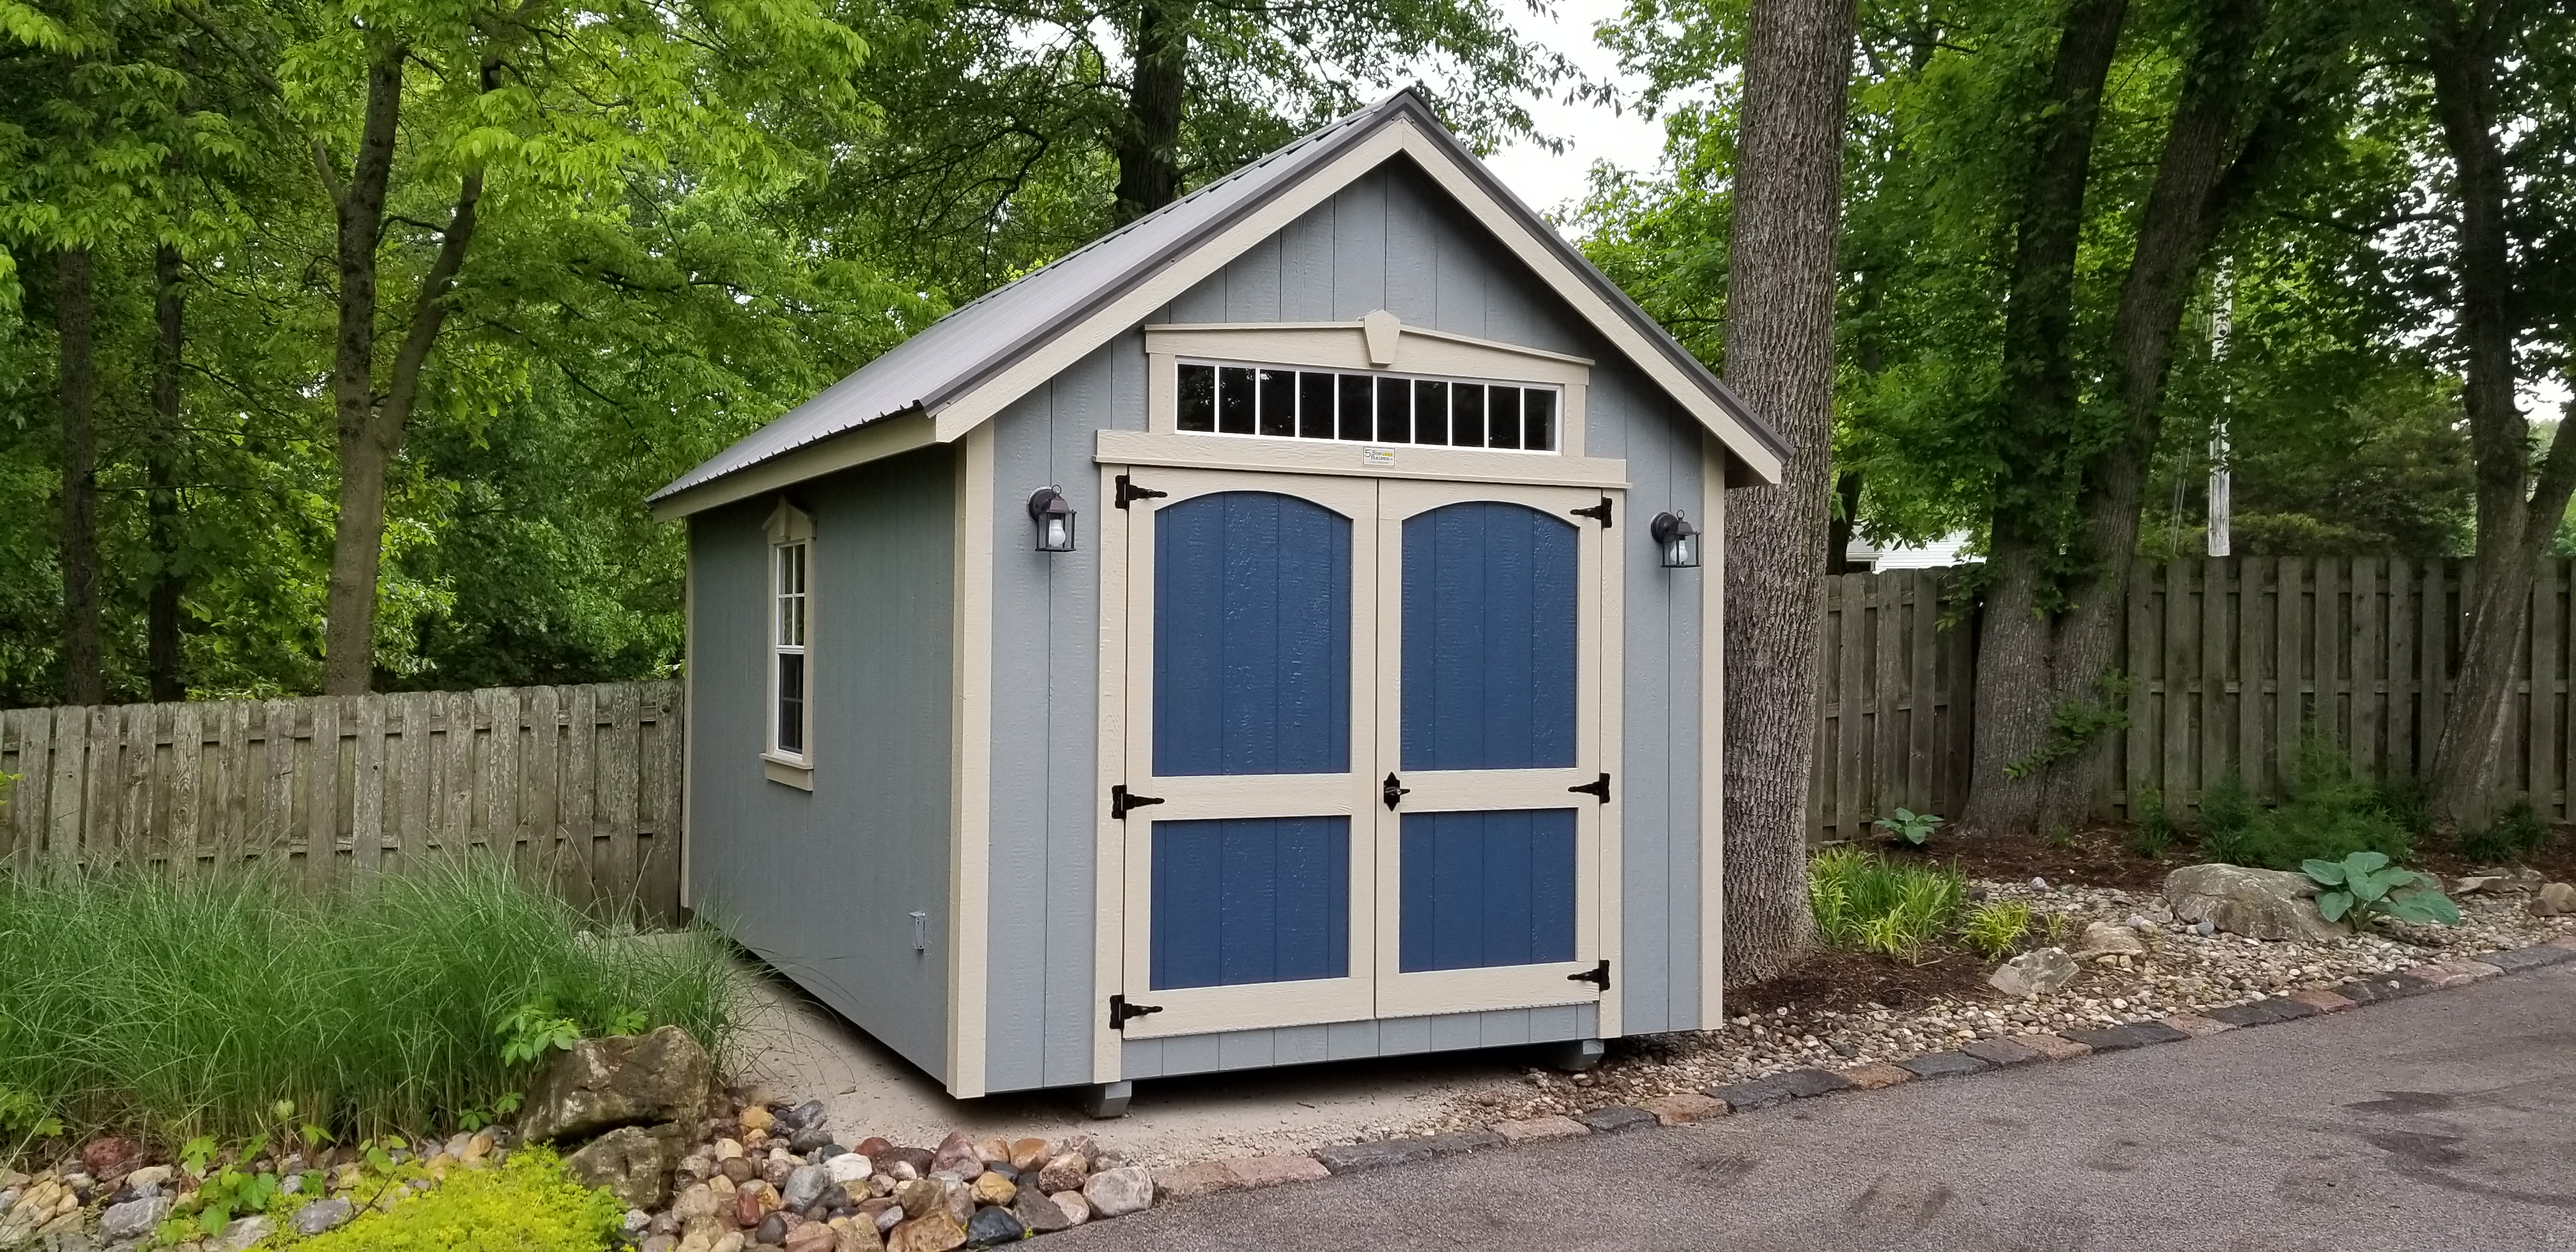 best outdoor storage sheds for sale in cuba missouri